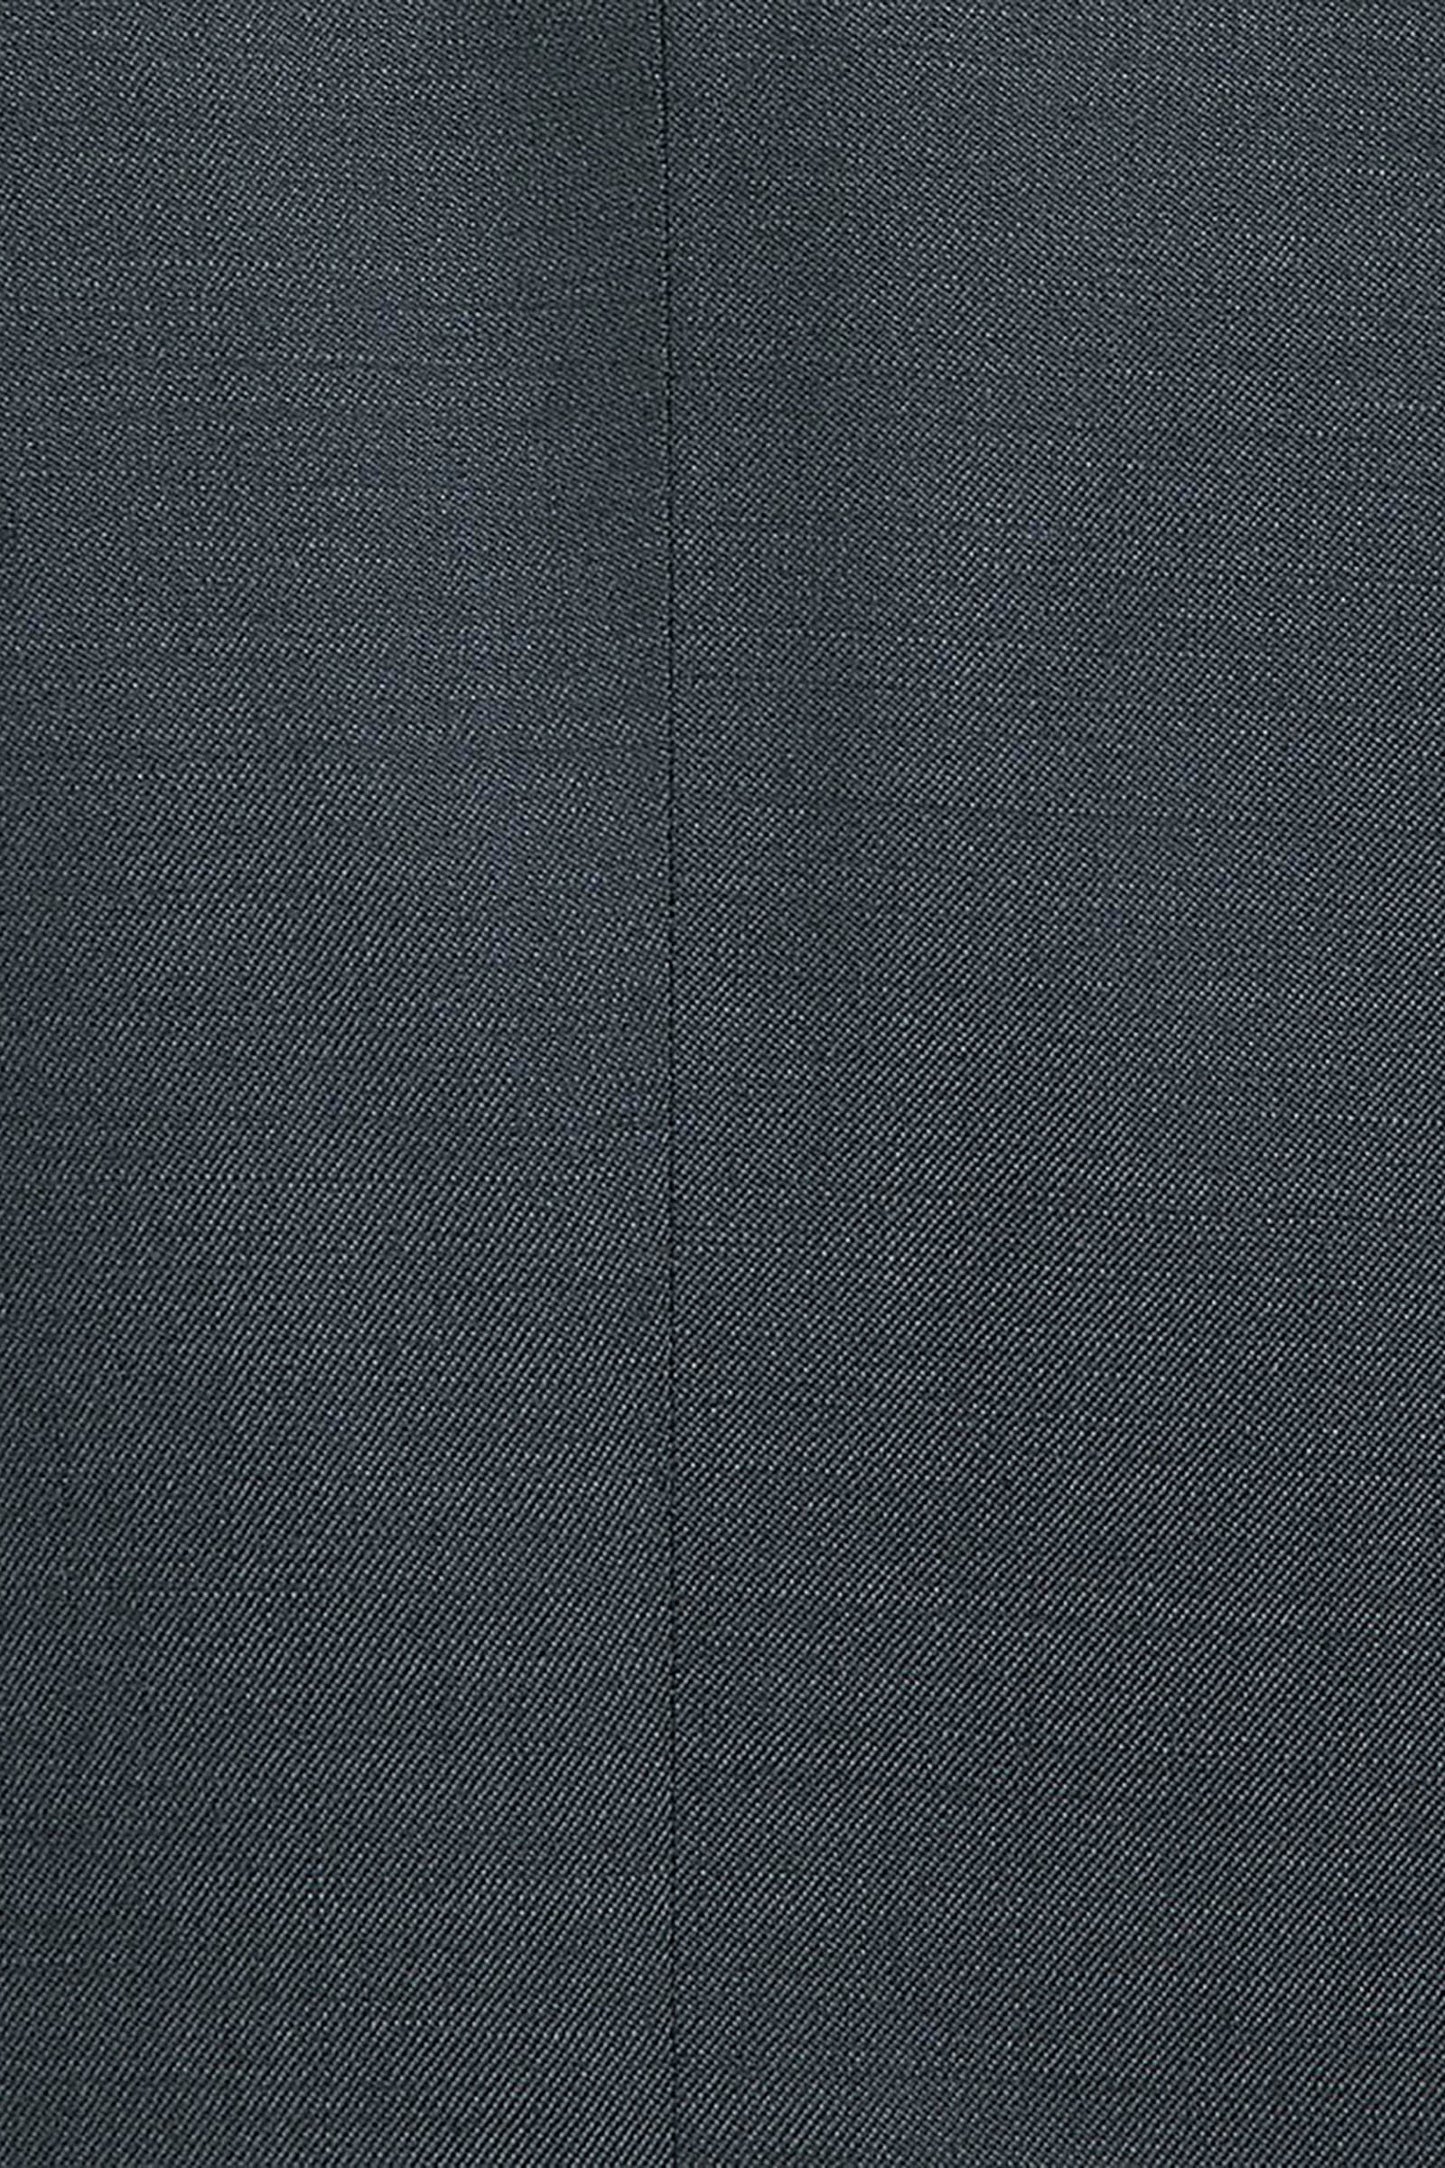 GIBSON SLIM FIT CHARCOAL BETA SUIT